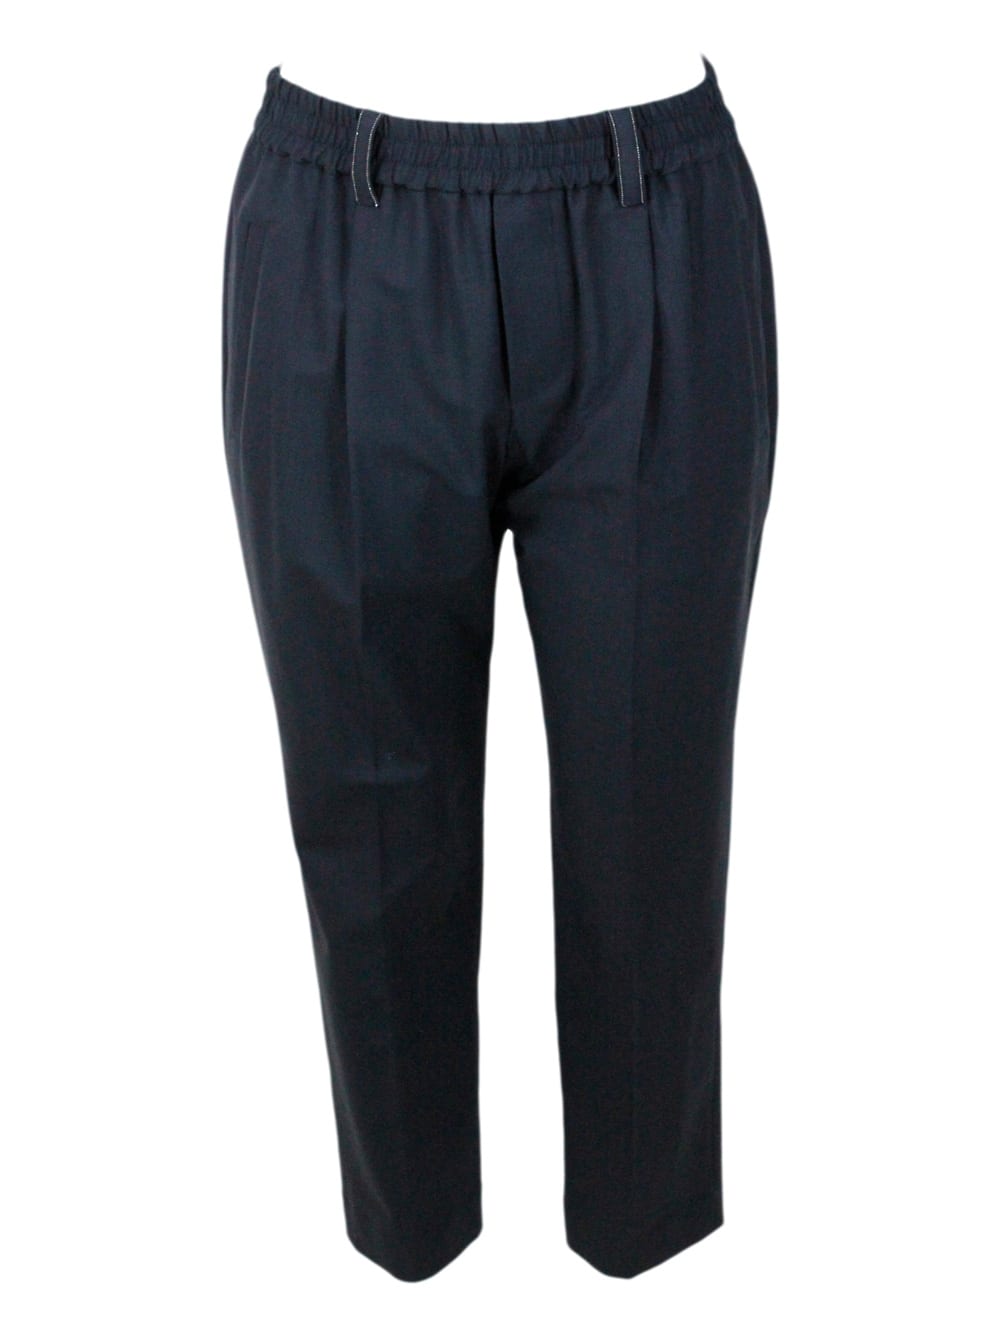 Shop Brunello Cucinelli Trousers Made Of Fine Fresh Stretch Wool With Elastic Waistband And Side Welt Pockets. Brilliant Jew In Blu